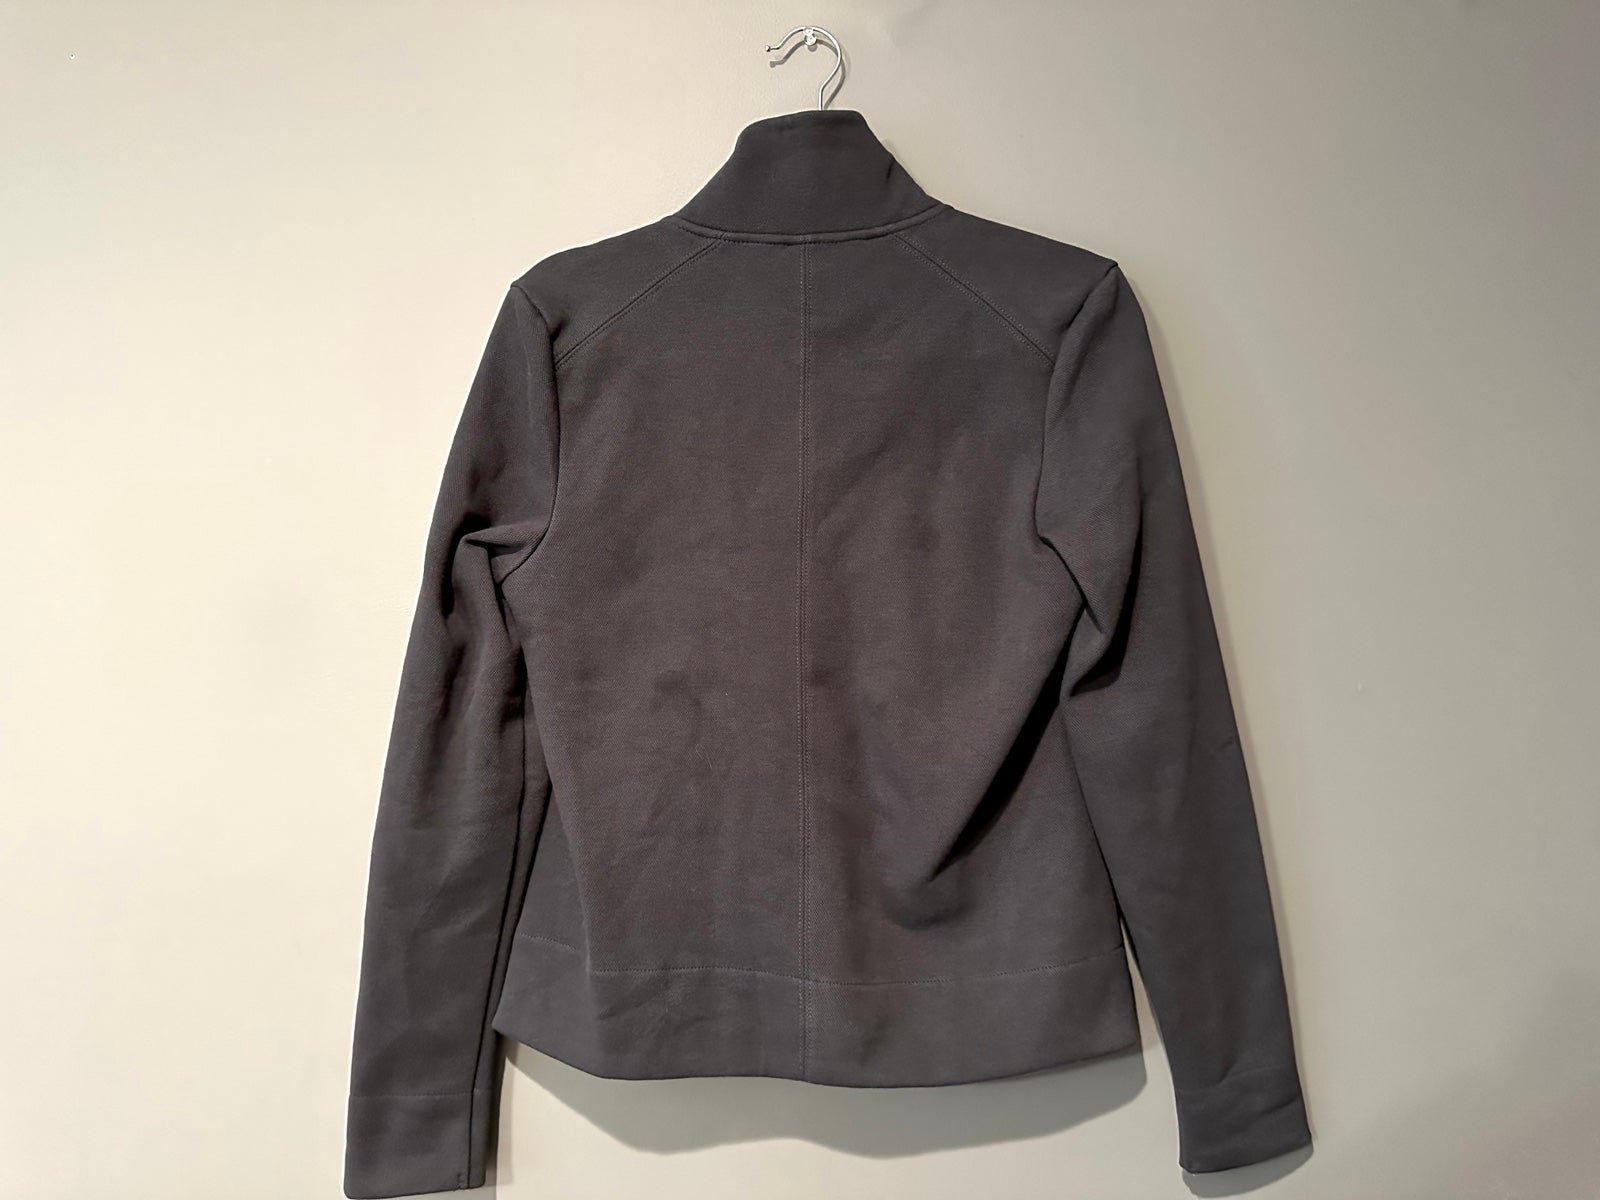 cheapest place to buy  Fleece Full-Zip Panera Catering Jacket ogwGGAerX online store